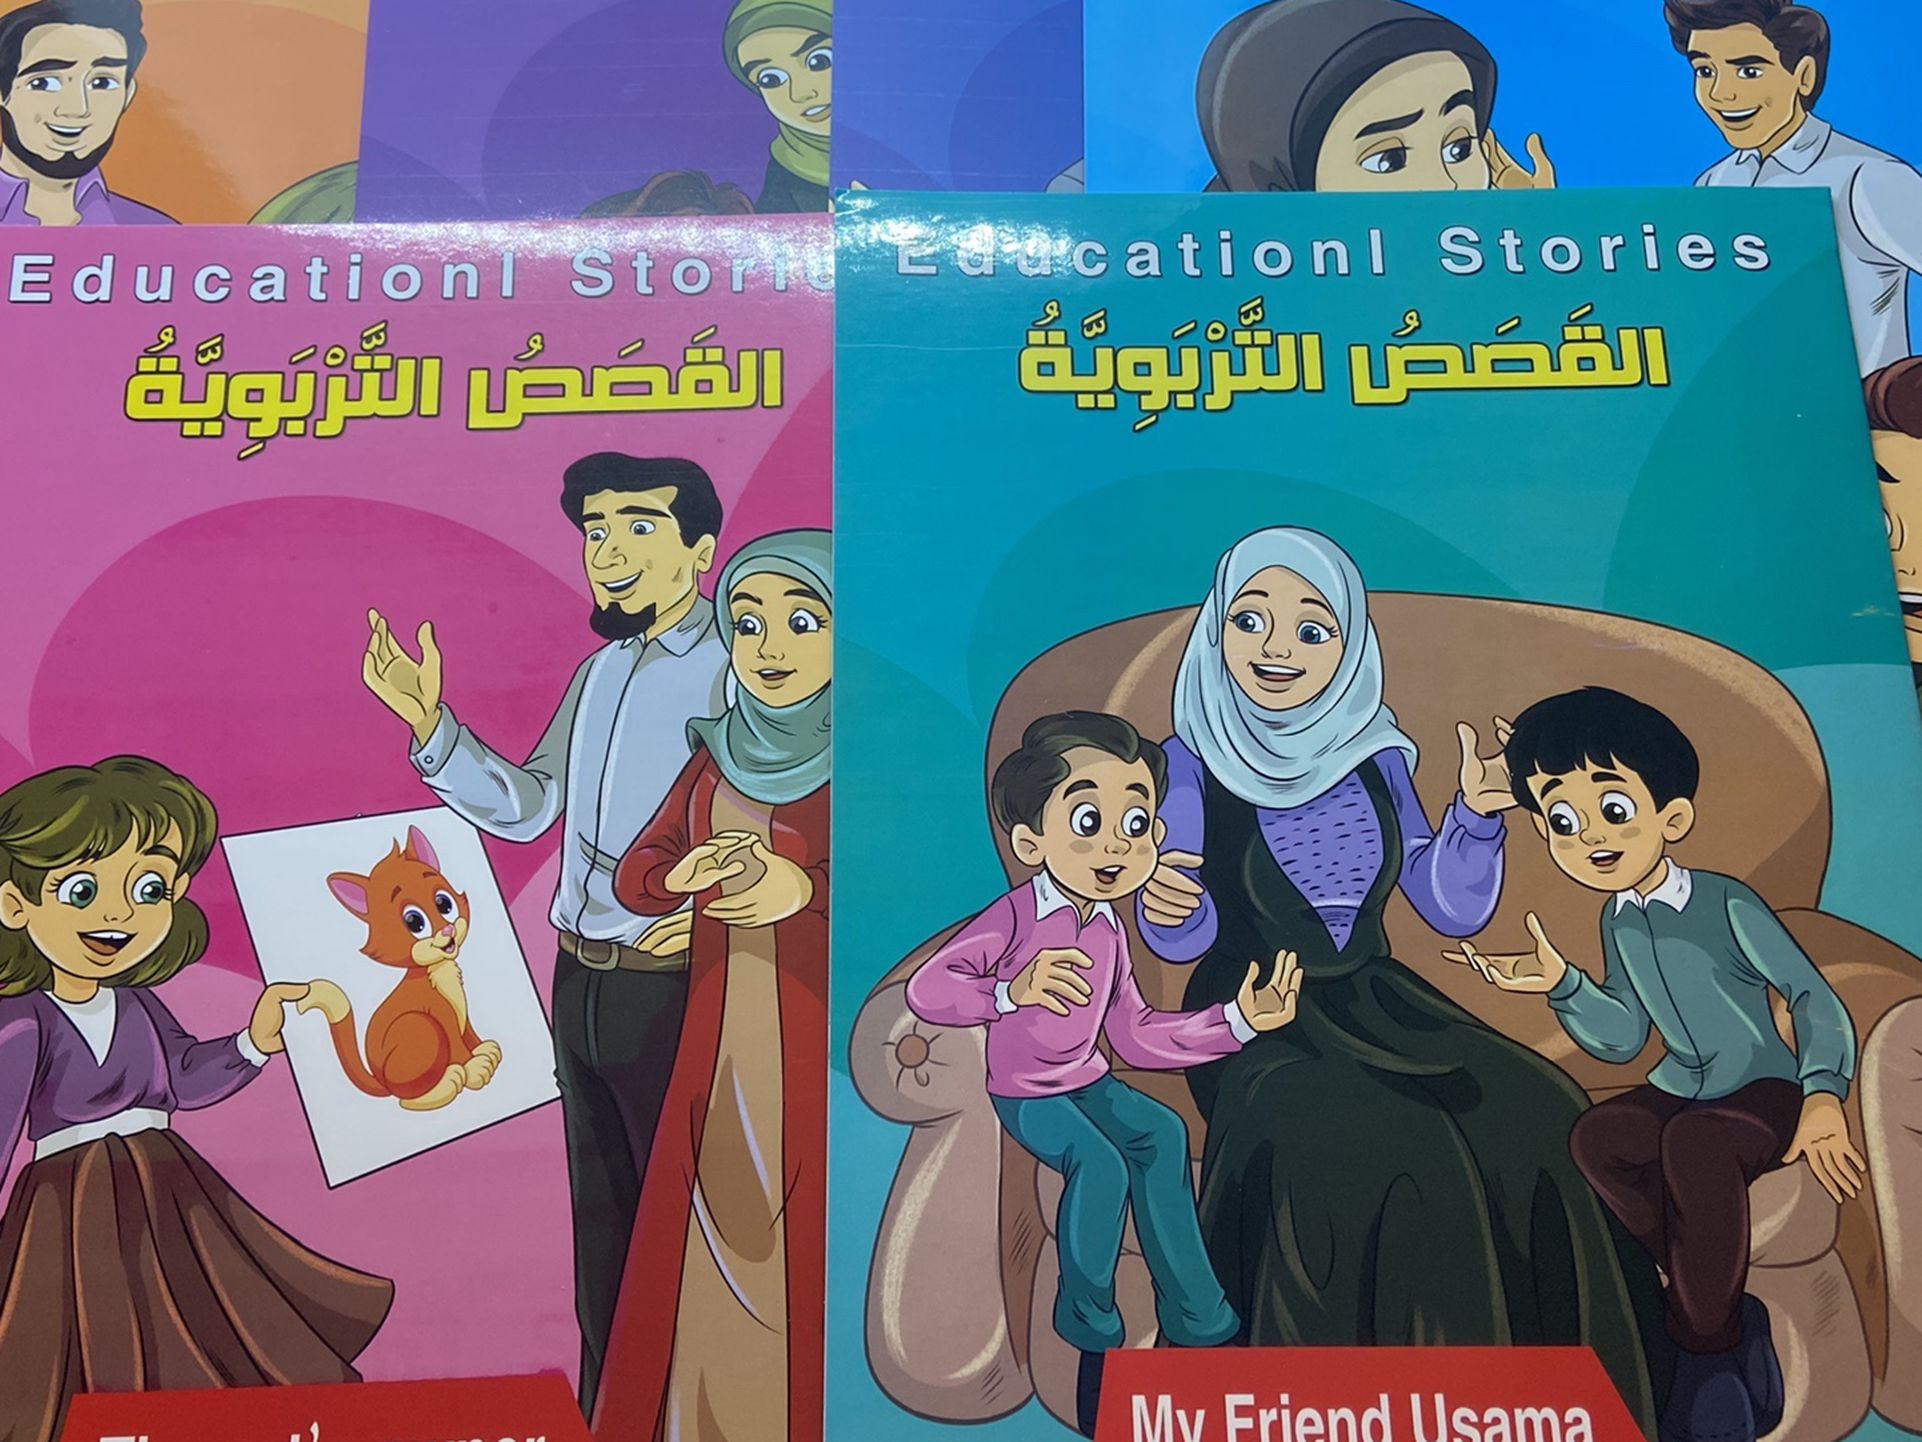 Set of 6 Arabic educational stories for kids, in Arabic and English language